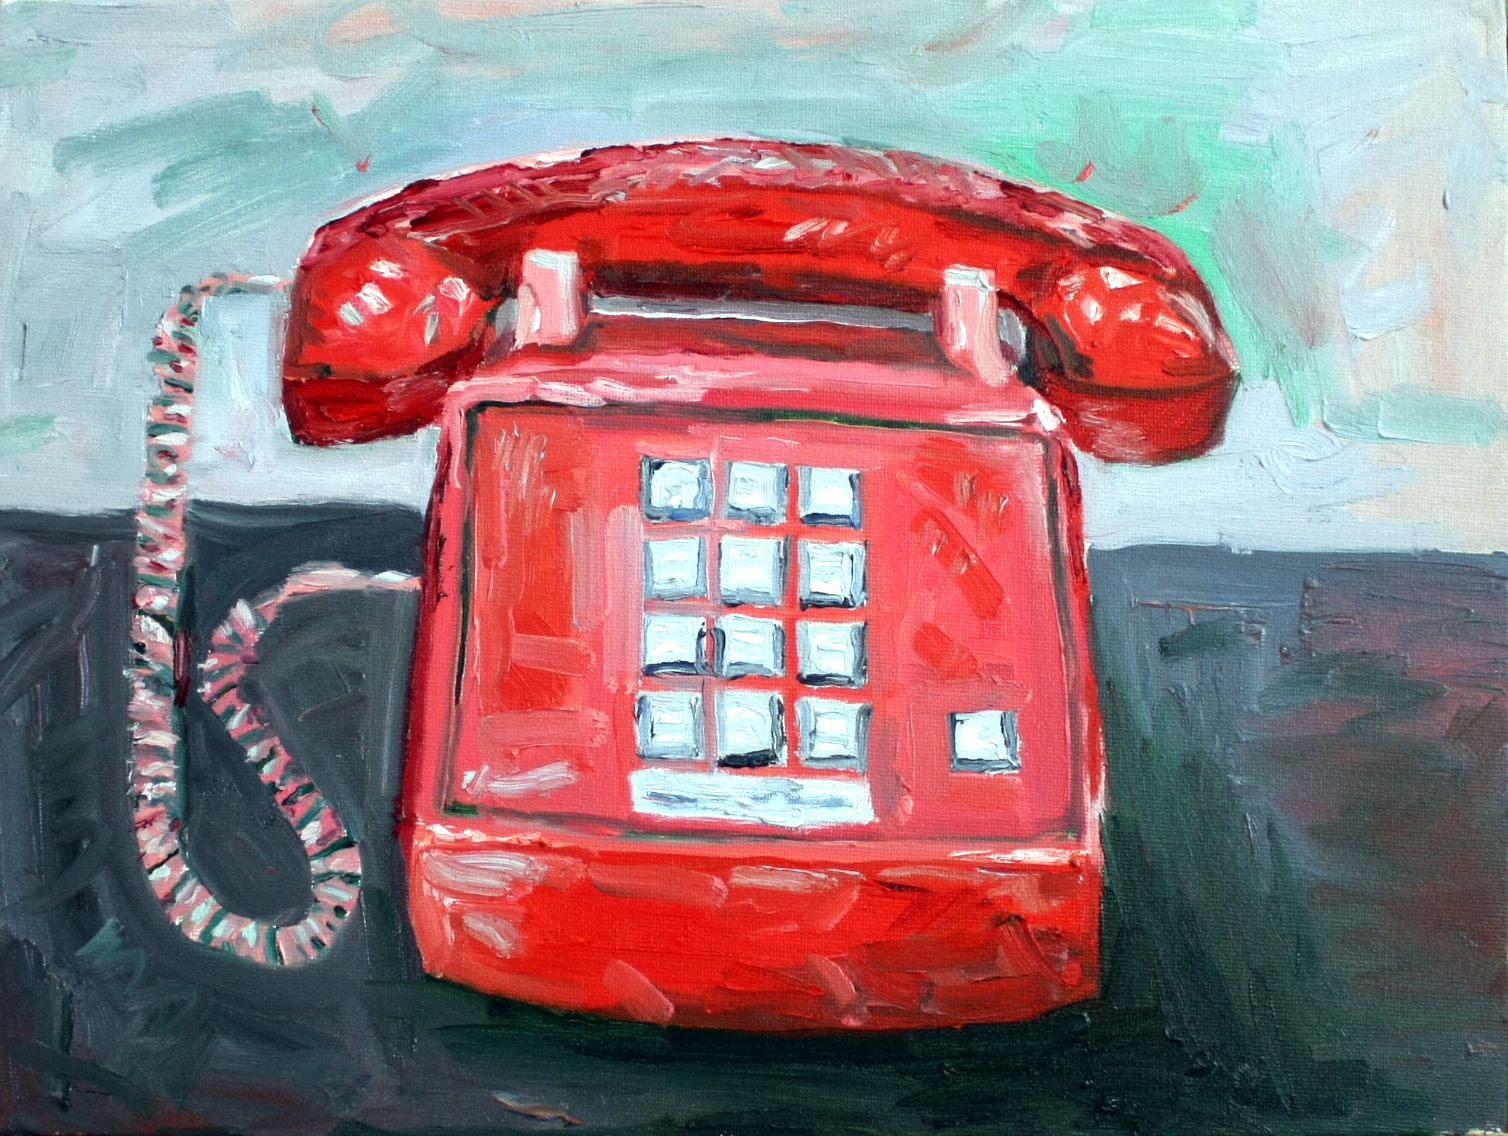 Red Telephone in an Apocalyptic Landscape